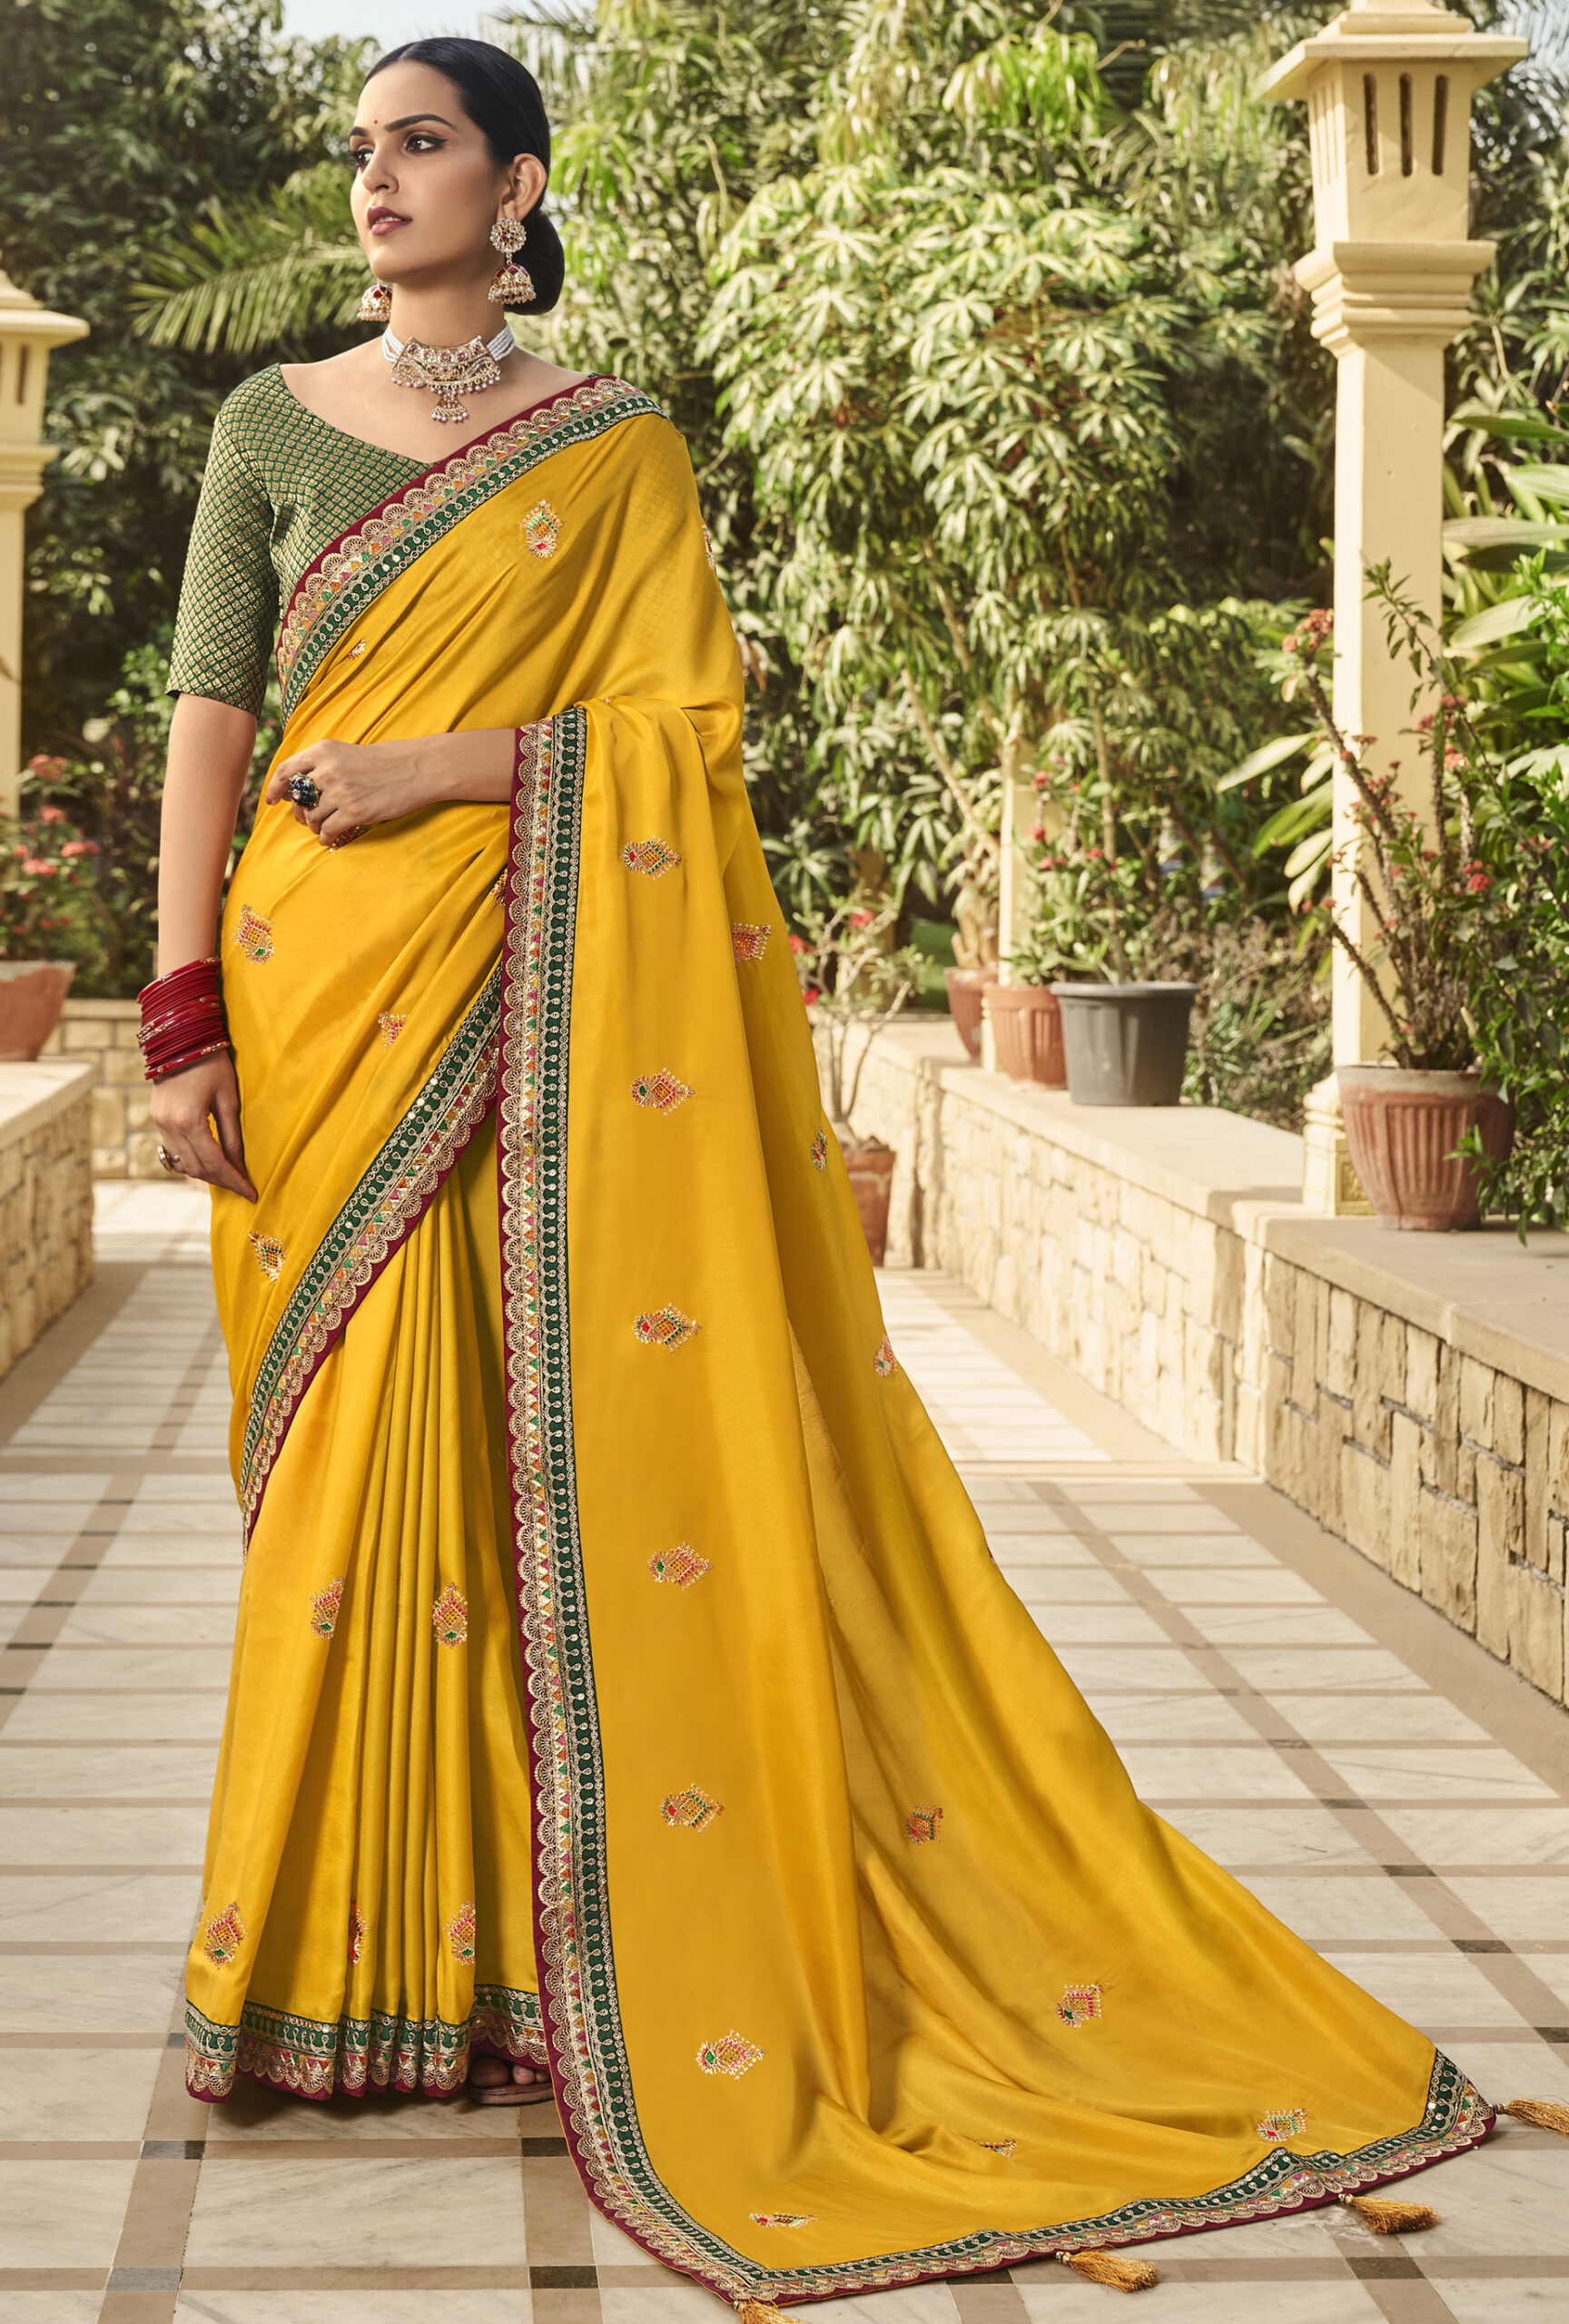 Latest Party Wear Yellow Saree with Price